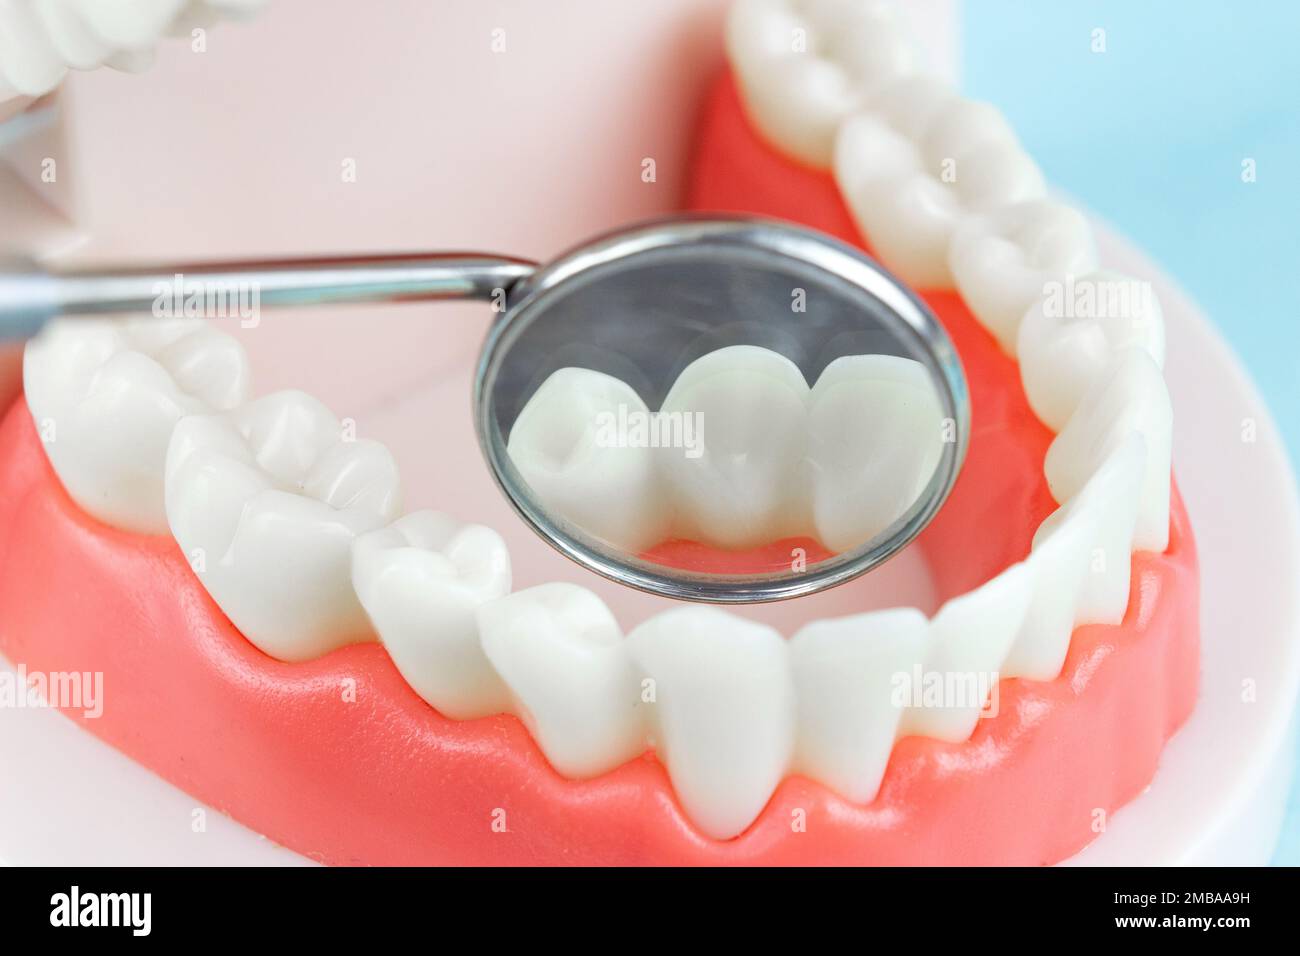 False teeth, jaws. Dentistry instruments and dental hygienist checkup concept Dental care and dentist 's equipment concept. Copy space. Tooth model us Stock Photo